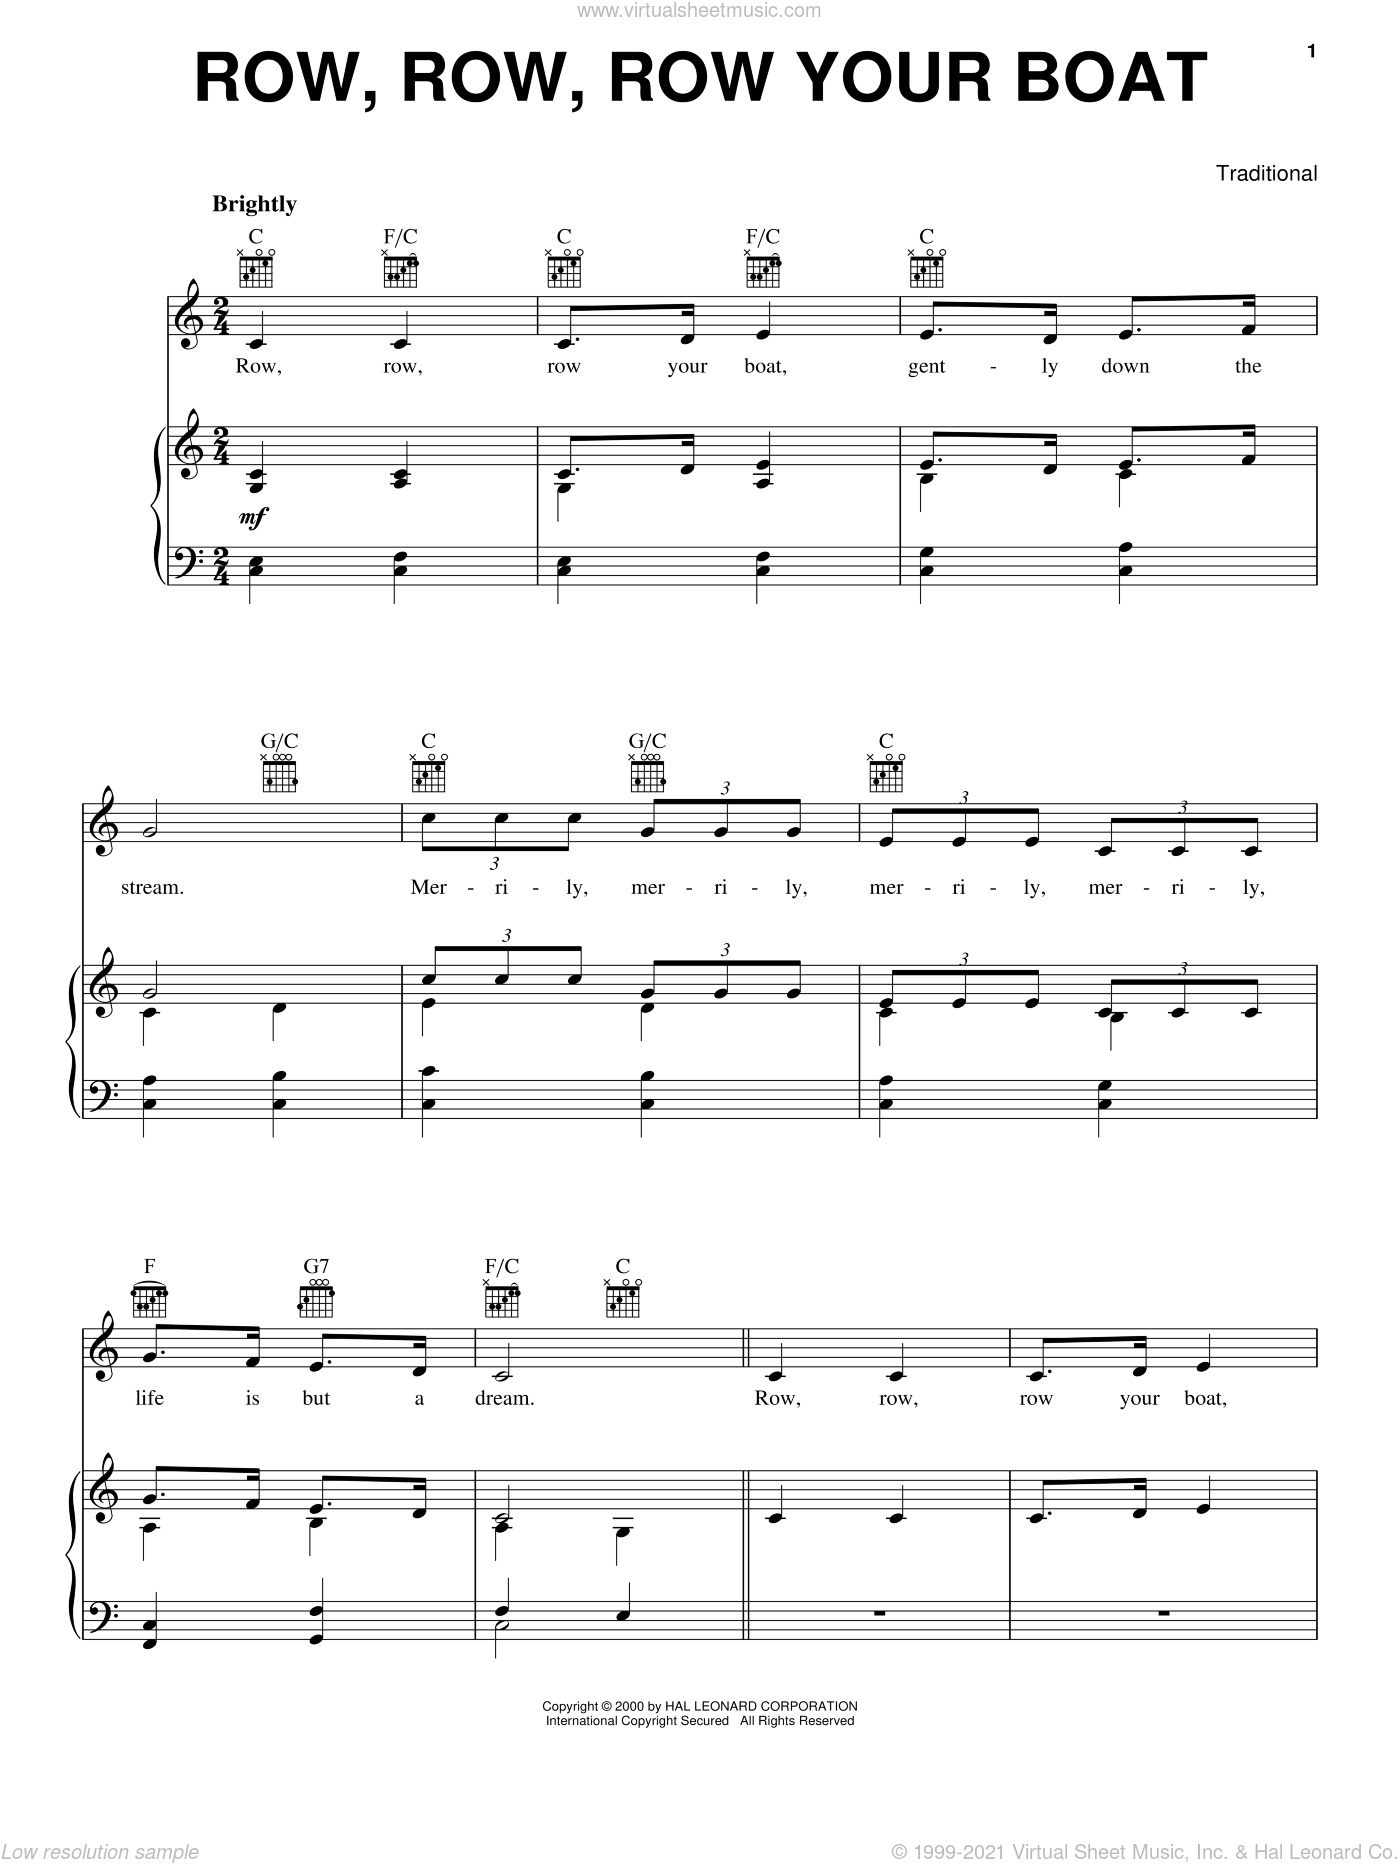 Row, Row, Row Your Boat sheet music for voice, piano or guitar